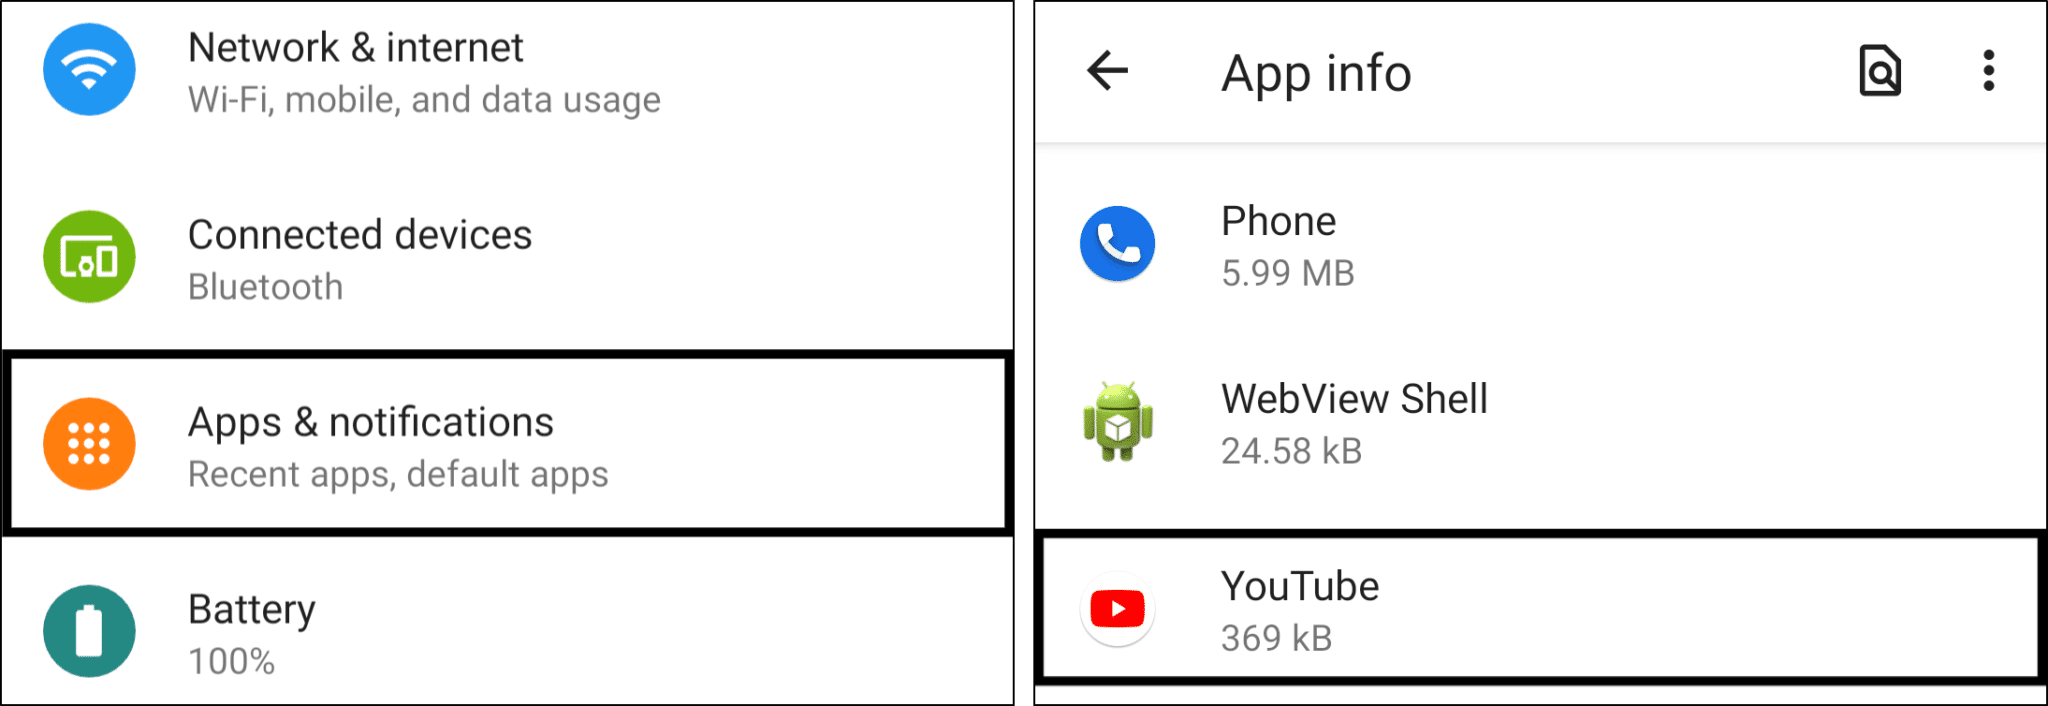 access YouTube app settings in system settings on Android